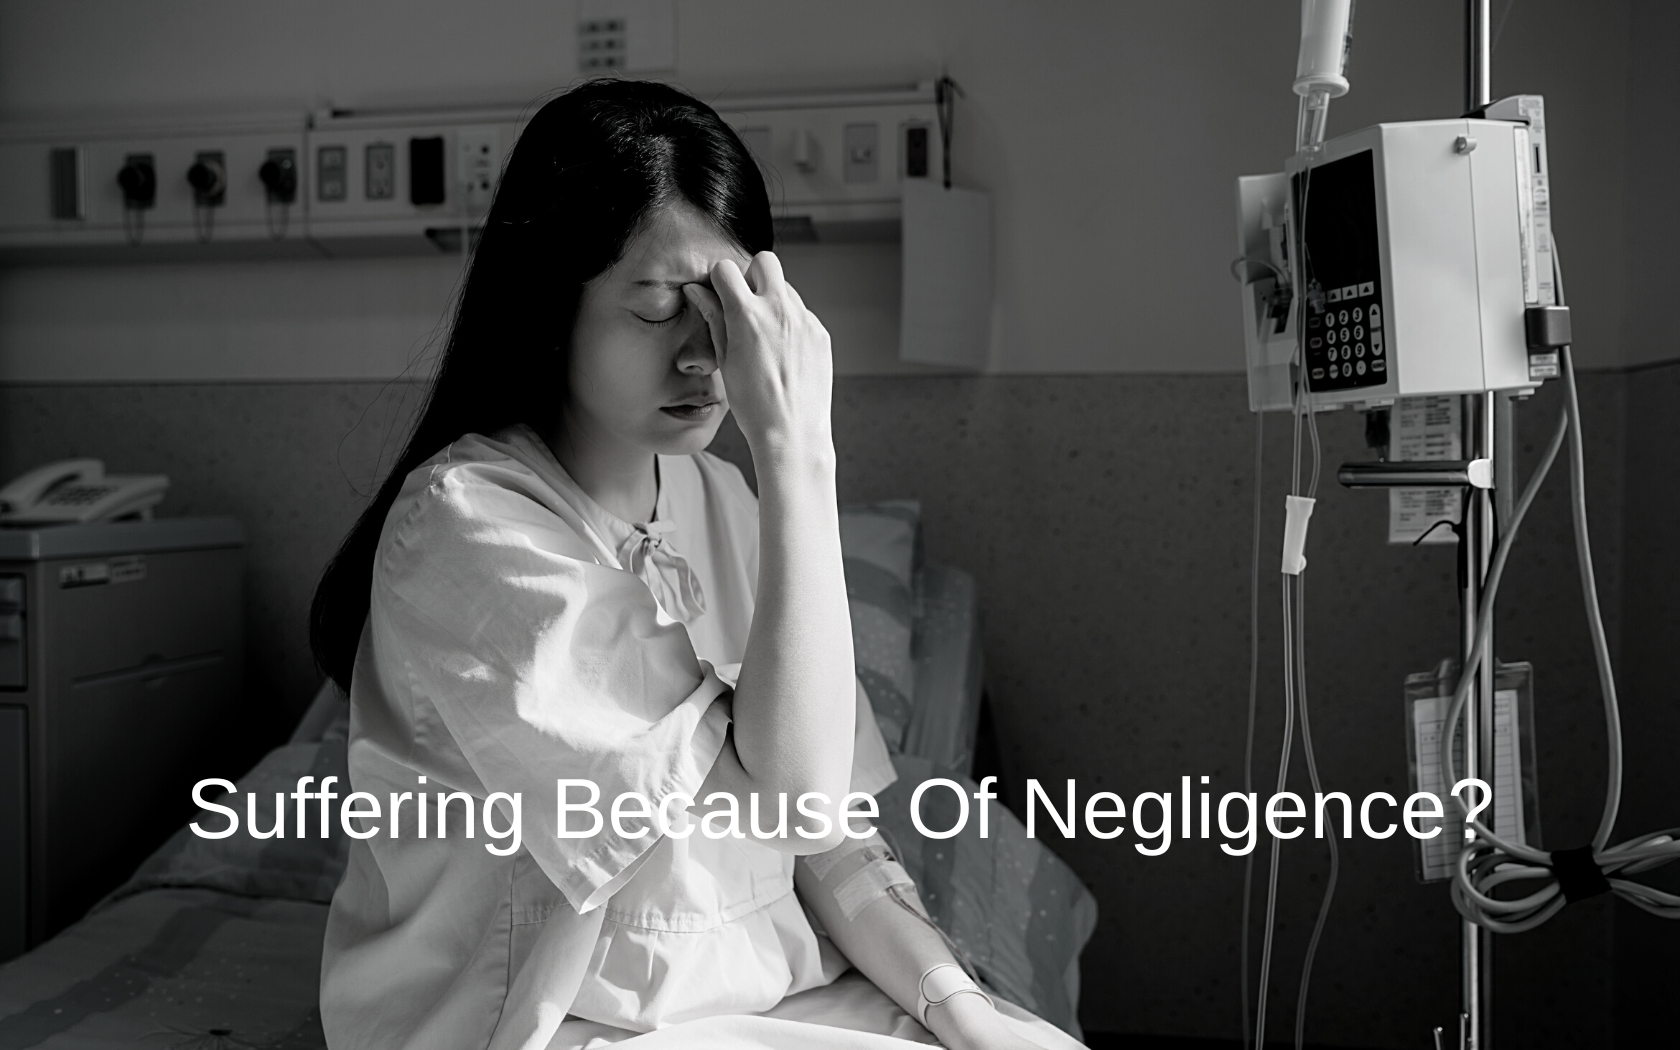 Patient suffers because of medical negligence.